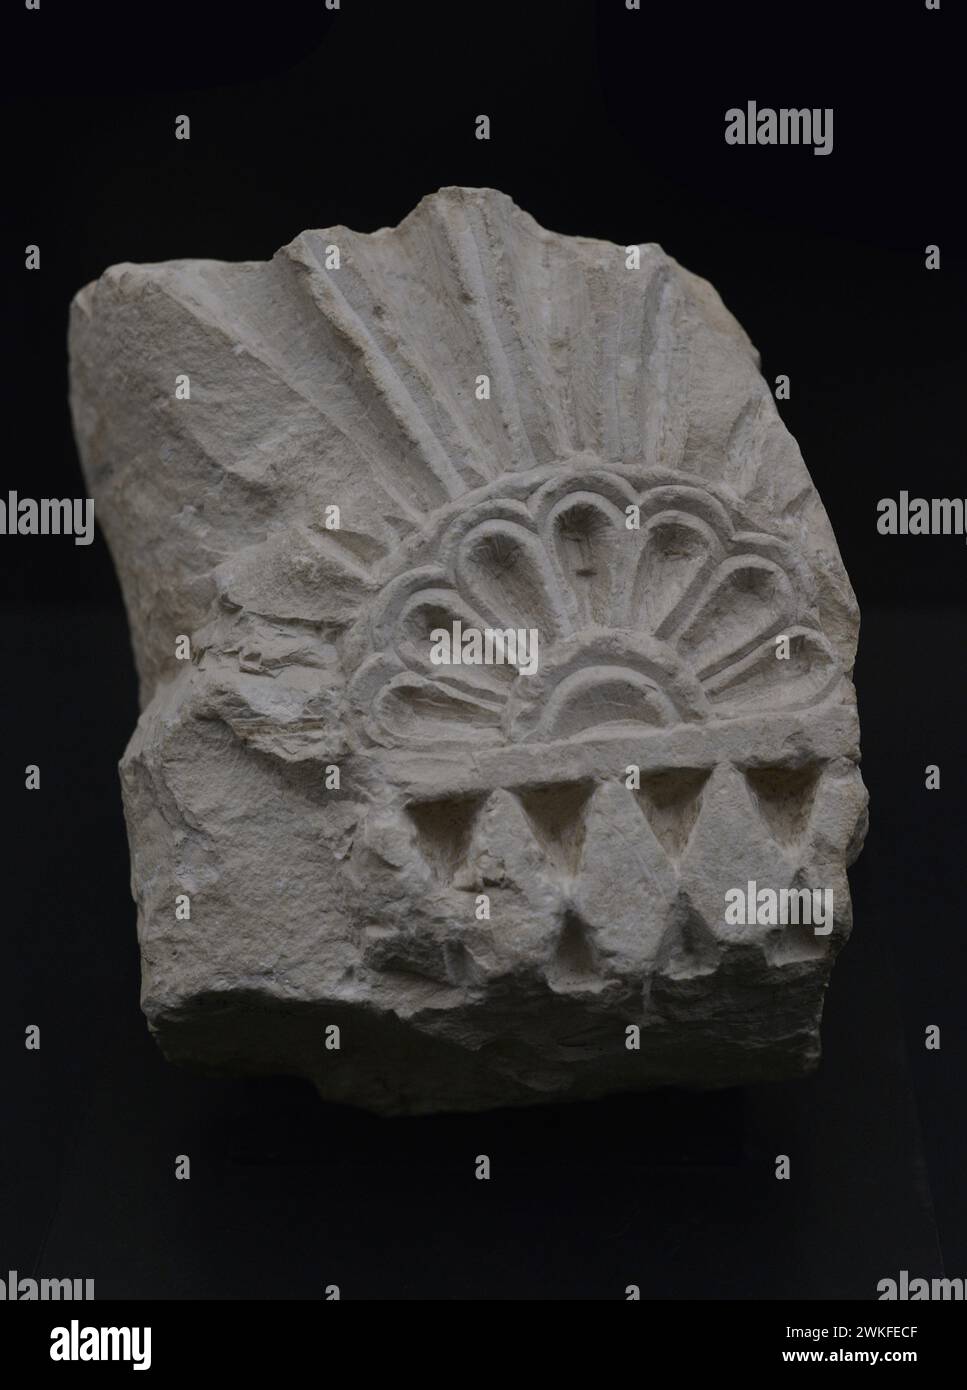 Fragment of a niche plate with bevelled decoration, scallop on a gadrooned hinge line. Limestone. 7th century. From the Cigarral del Aserradero, Toledo, Spain. Museum of Visigoth Councils and Culture. Toledo, Castile-La Mancha, Spain. Stock Photo